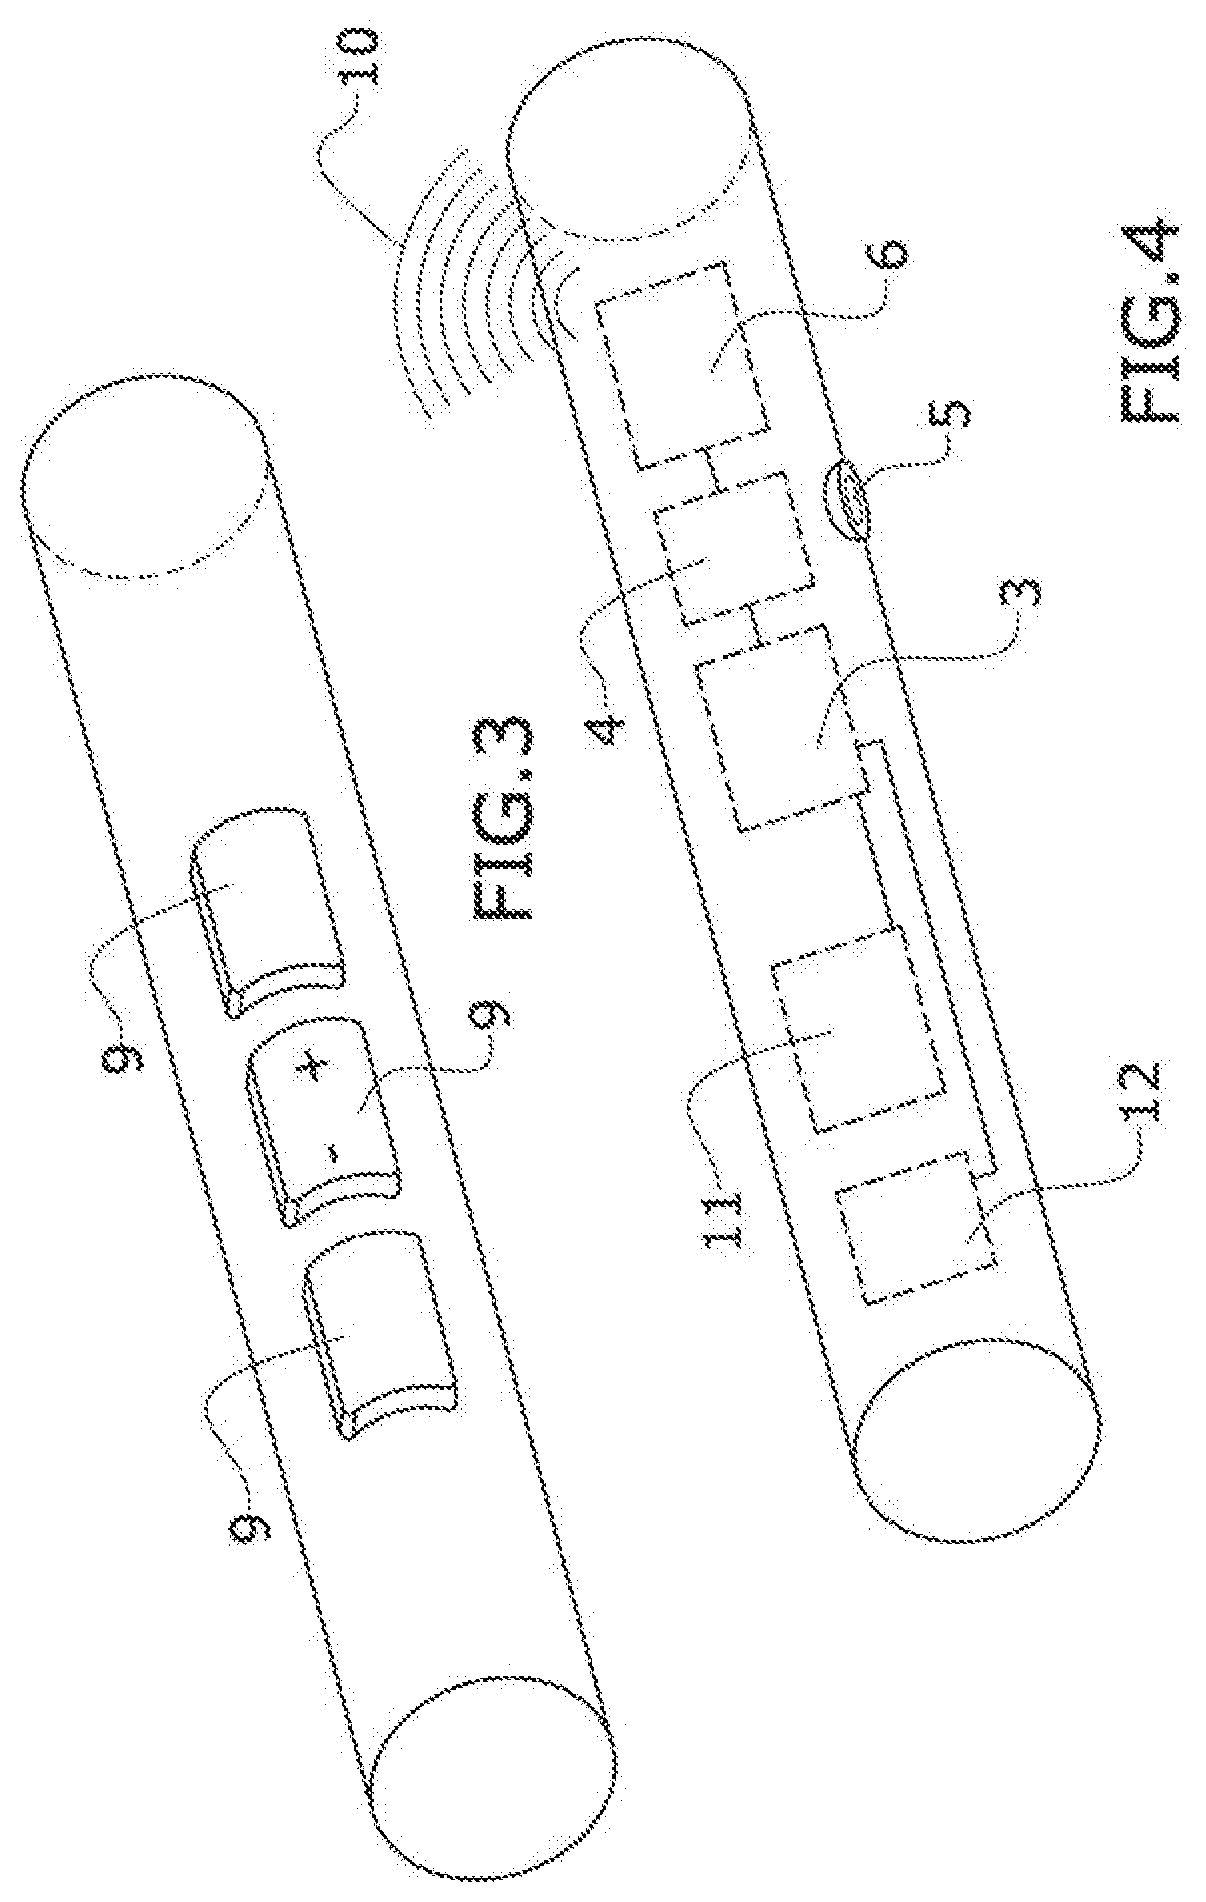 Control bar for controlling a traction unit